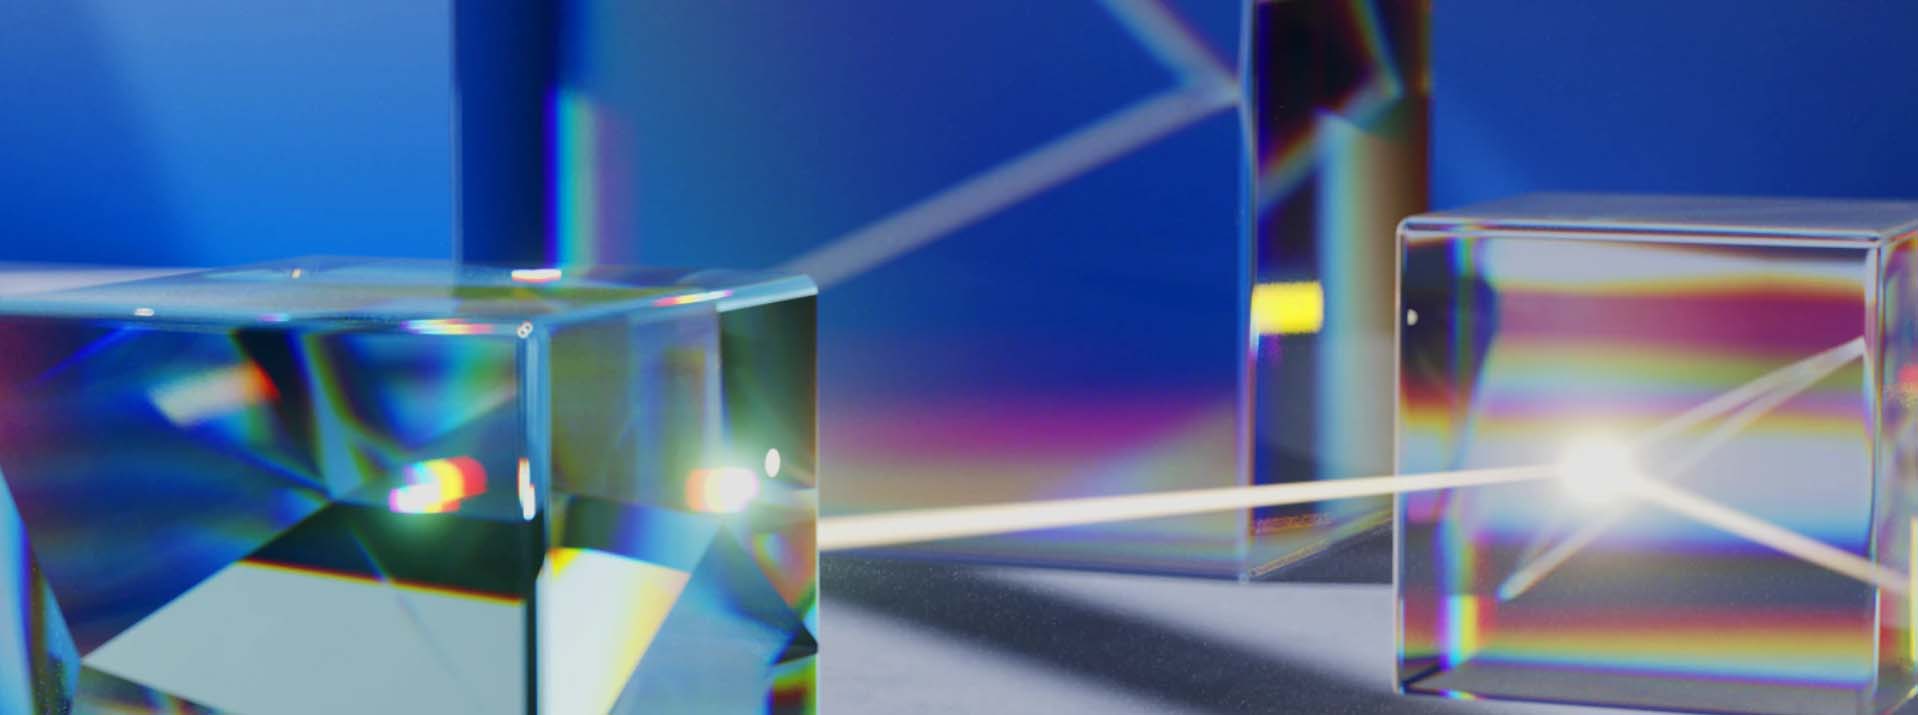 light reflecting off a prism